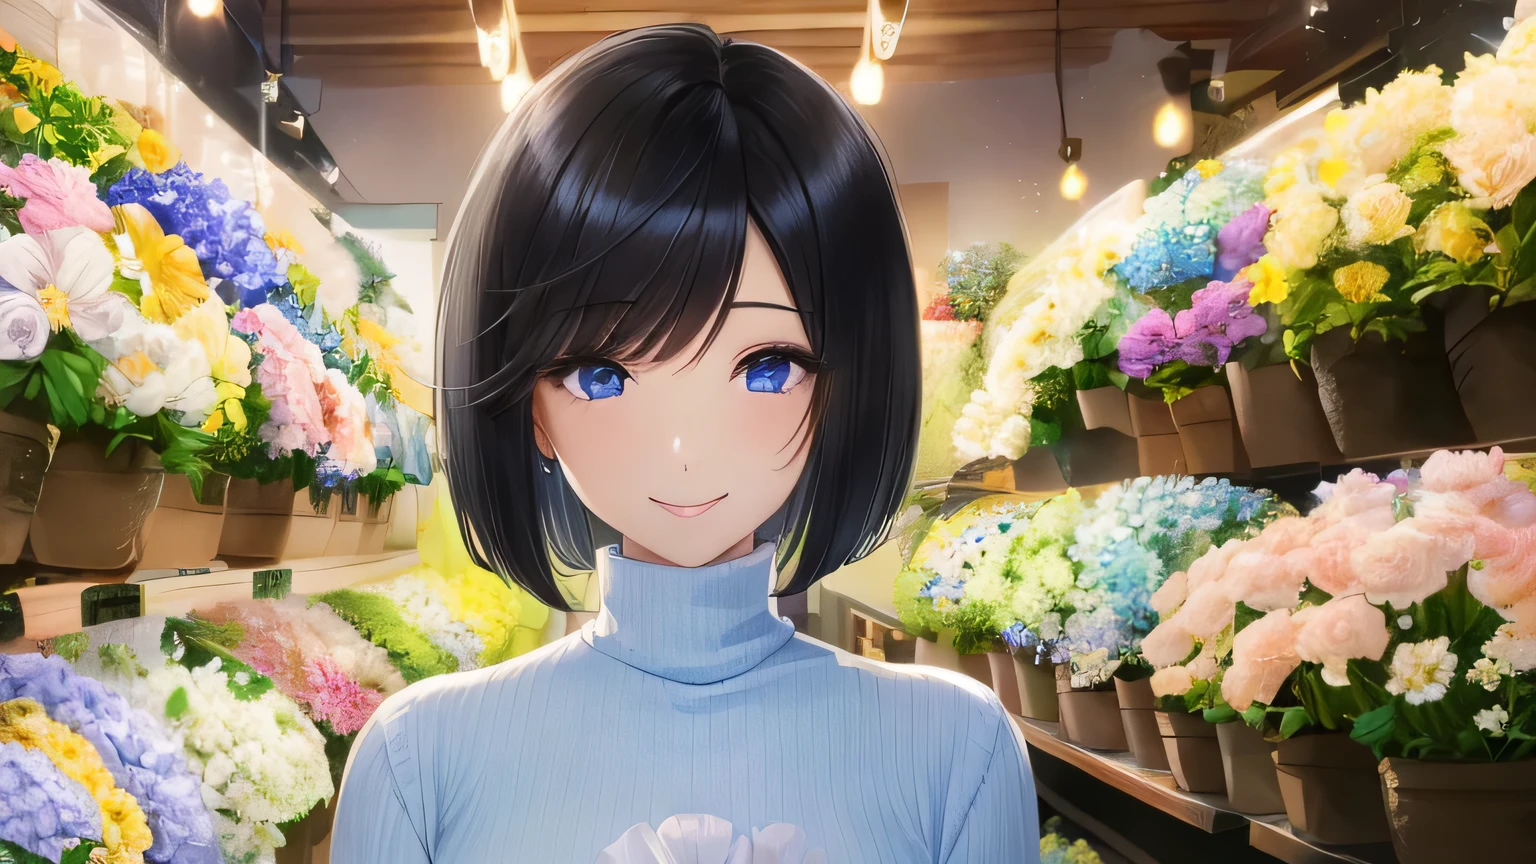 1 female、28 years old、美New髪, black hair、shortcut、bob cut、Rin々New、slanted eyes、eyeliner is clear、light blue eyes、long face、big smile、small bust、light blue long sleeve turtleneck、Looking at flowers at a flower shop